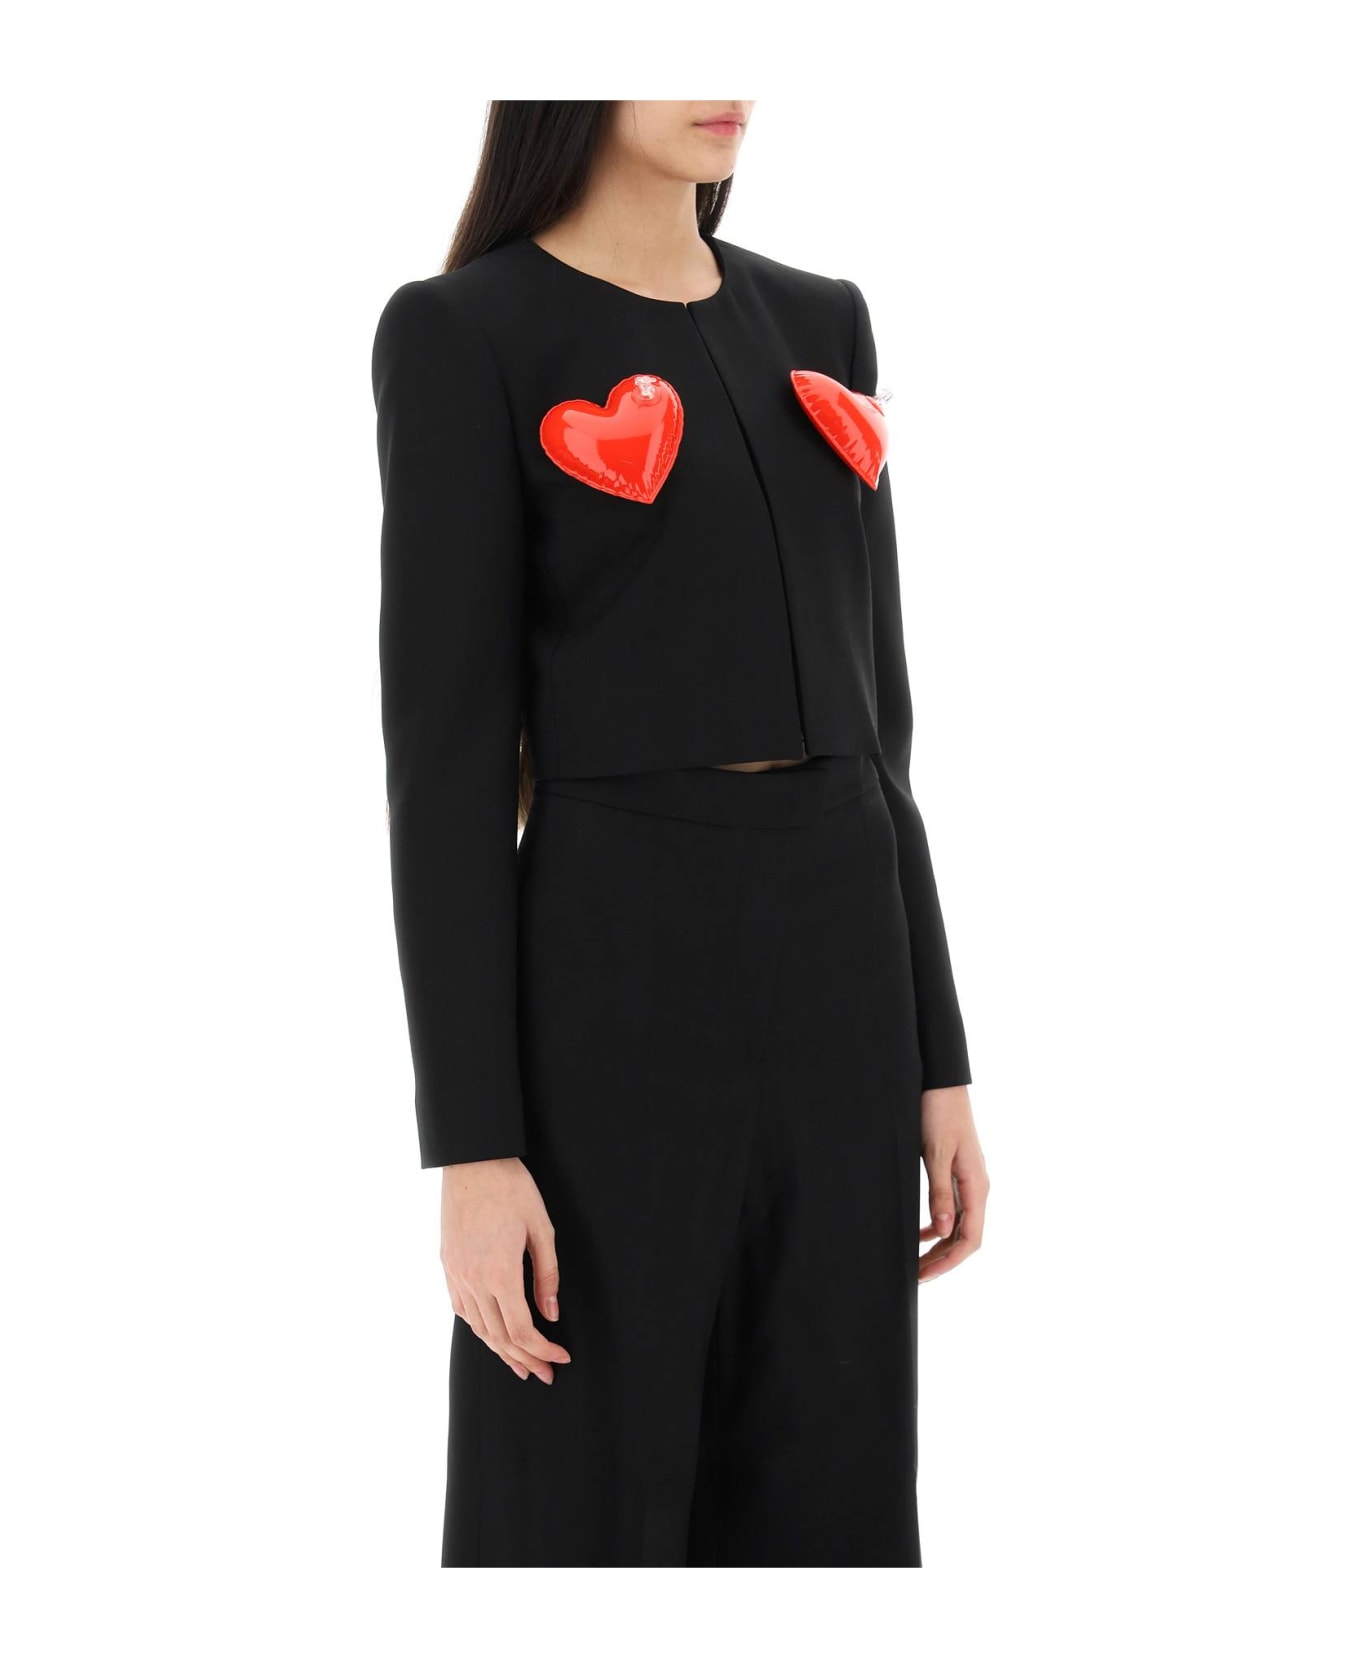 Moschino Inflatable Heart Applique Cropped Jacket - NERO (Black)